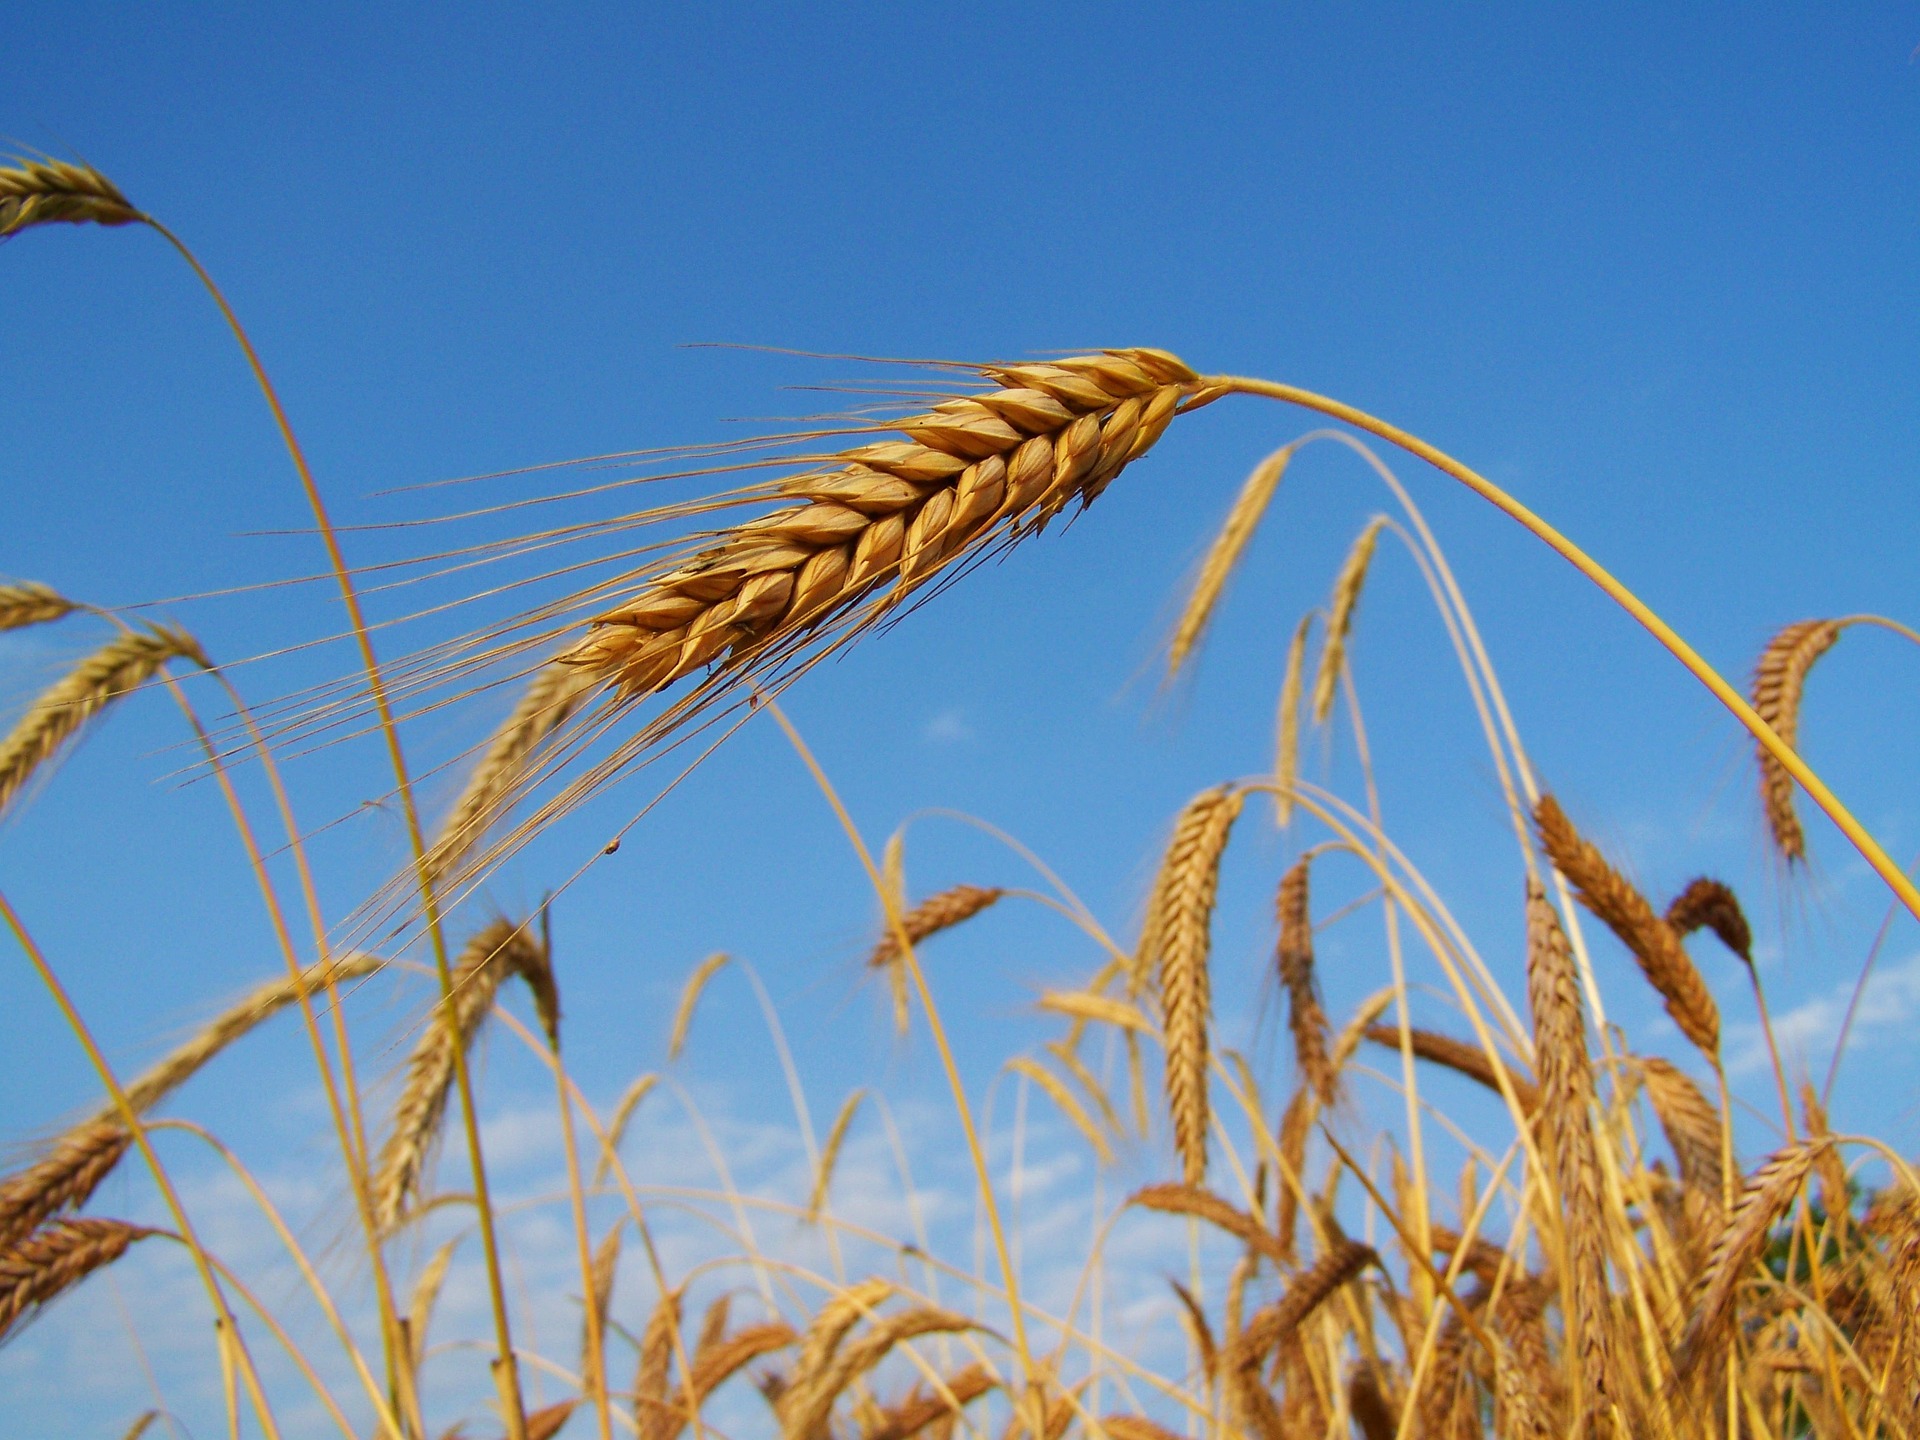 Photograph showing a close up of an ear of rye growing in a field.